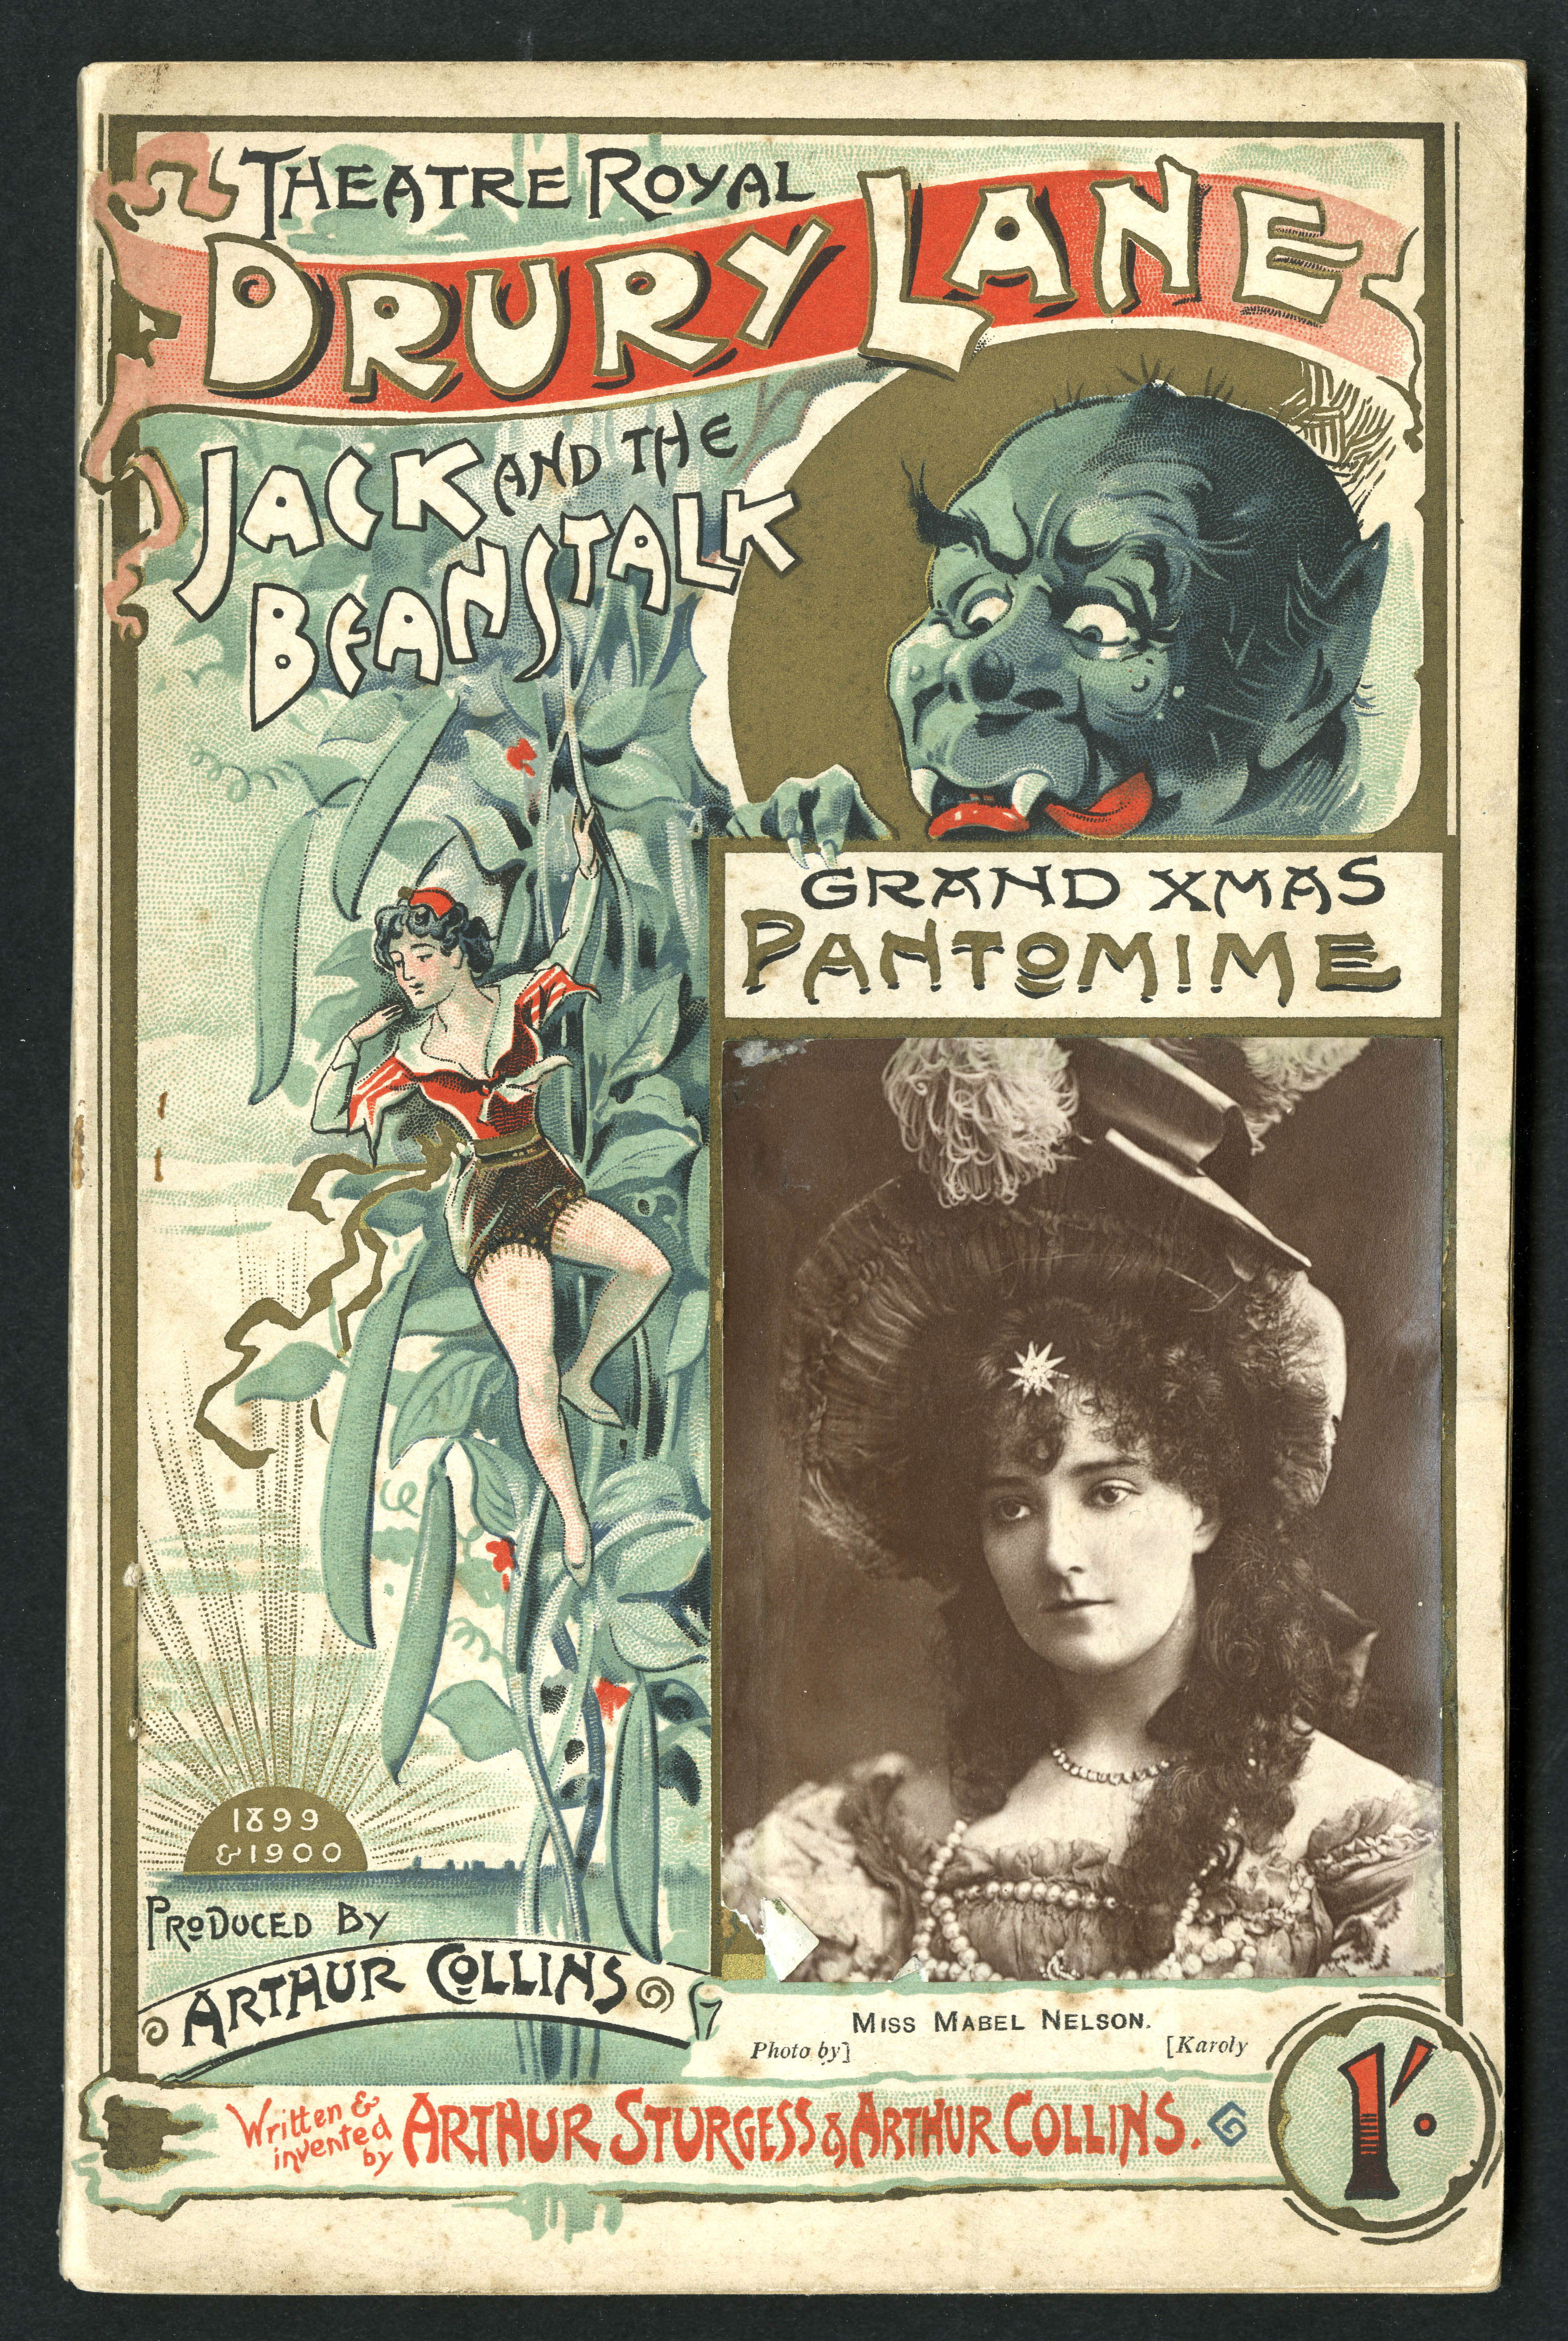 Programme for Drury Lane Theatre's 1899/1900 Pantomime 'Jack and the Beanstalk' with photograph of star Miss Mabel Nelson